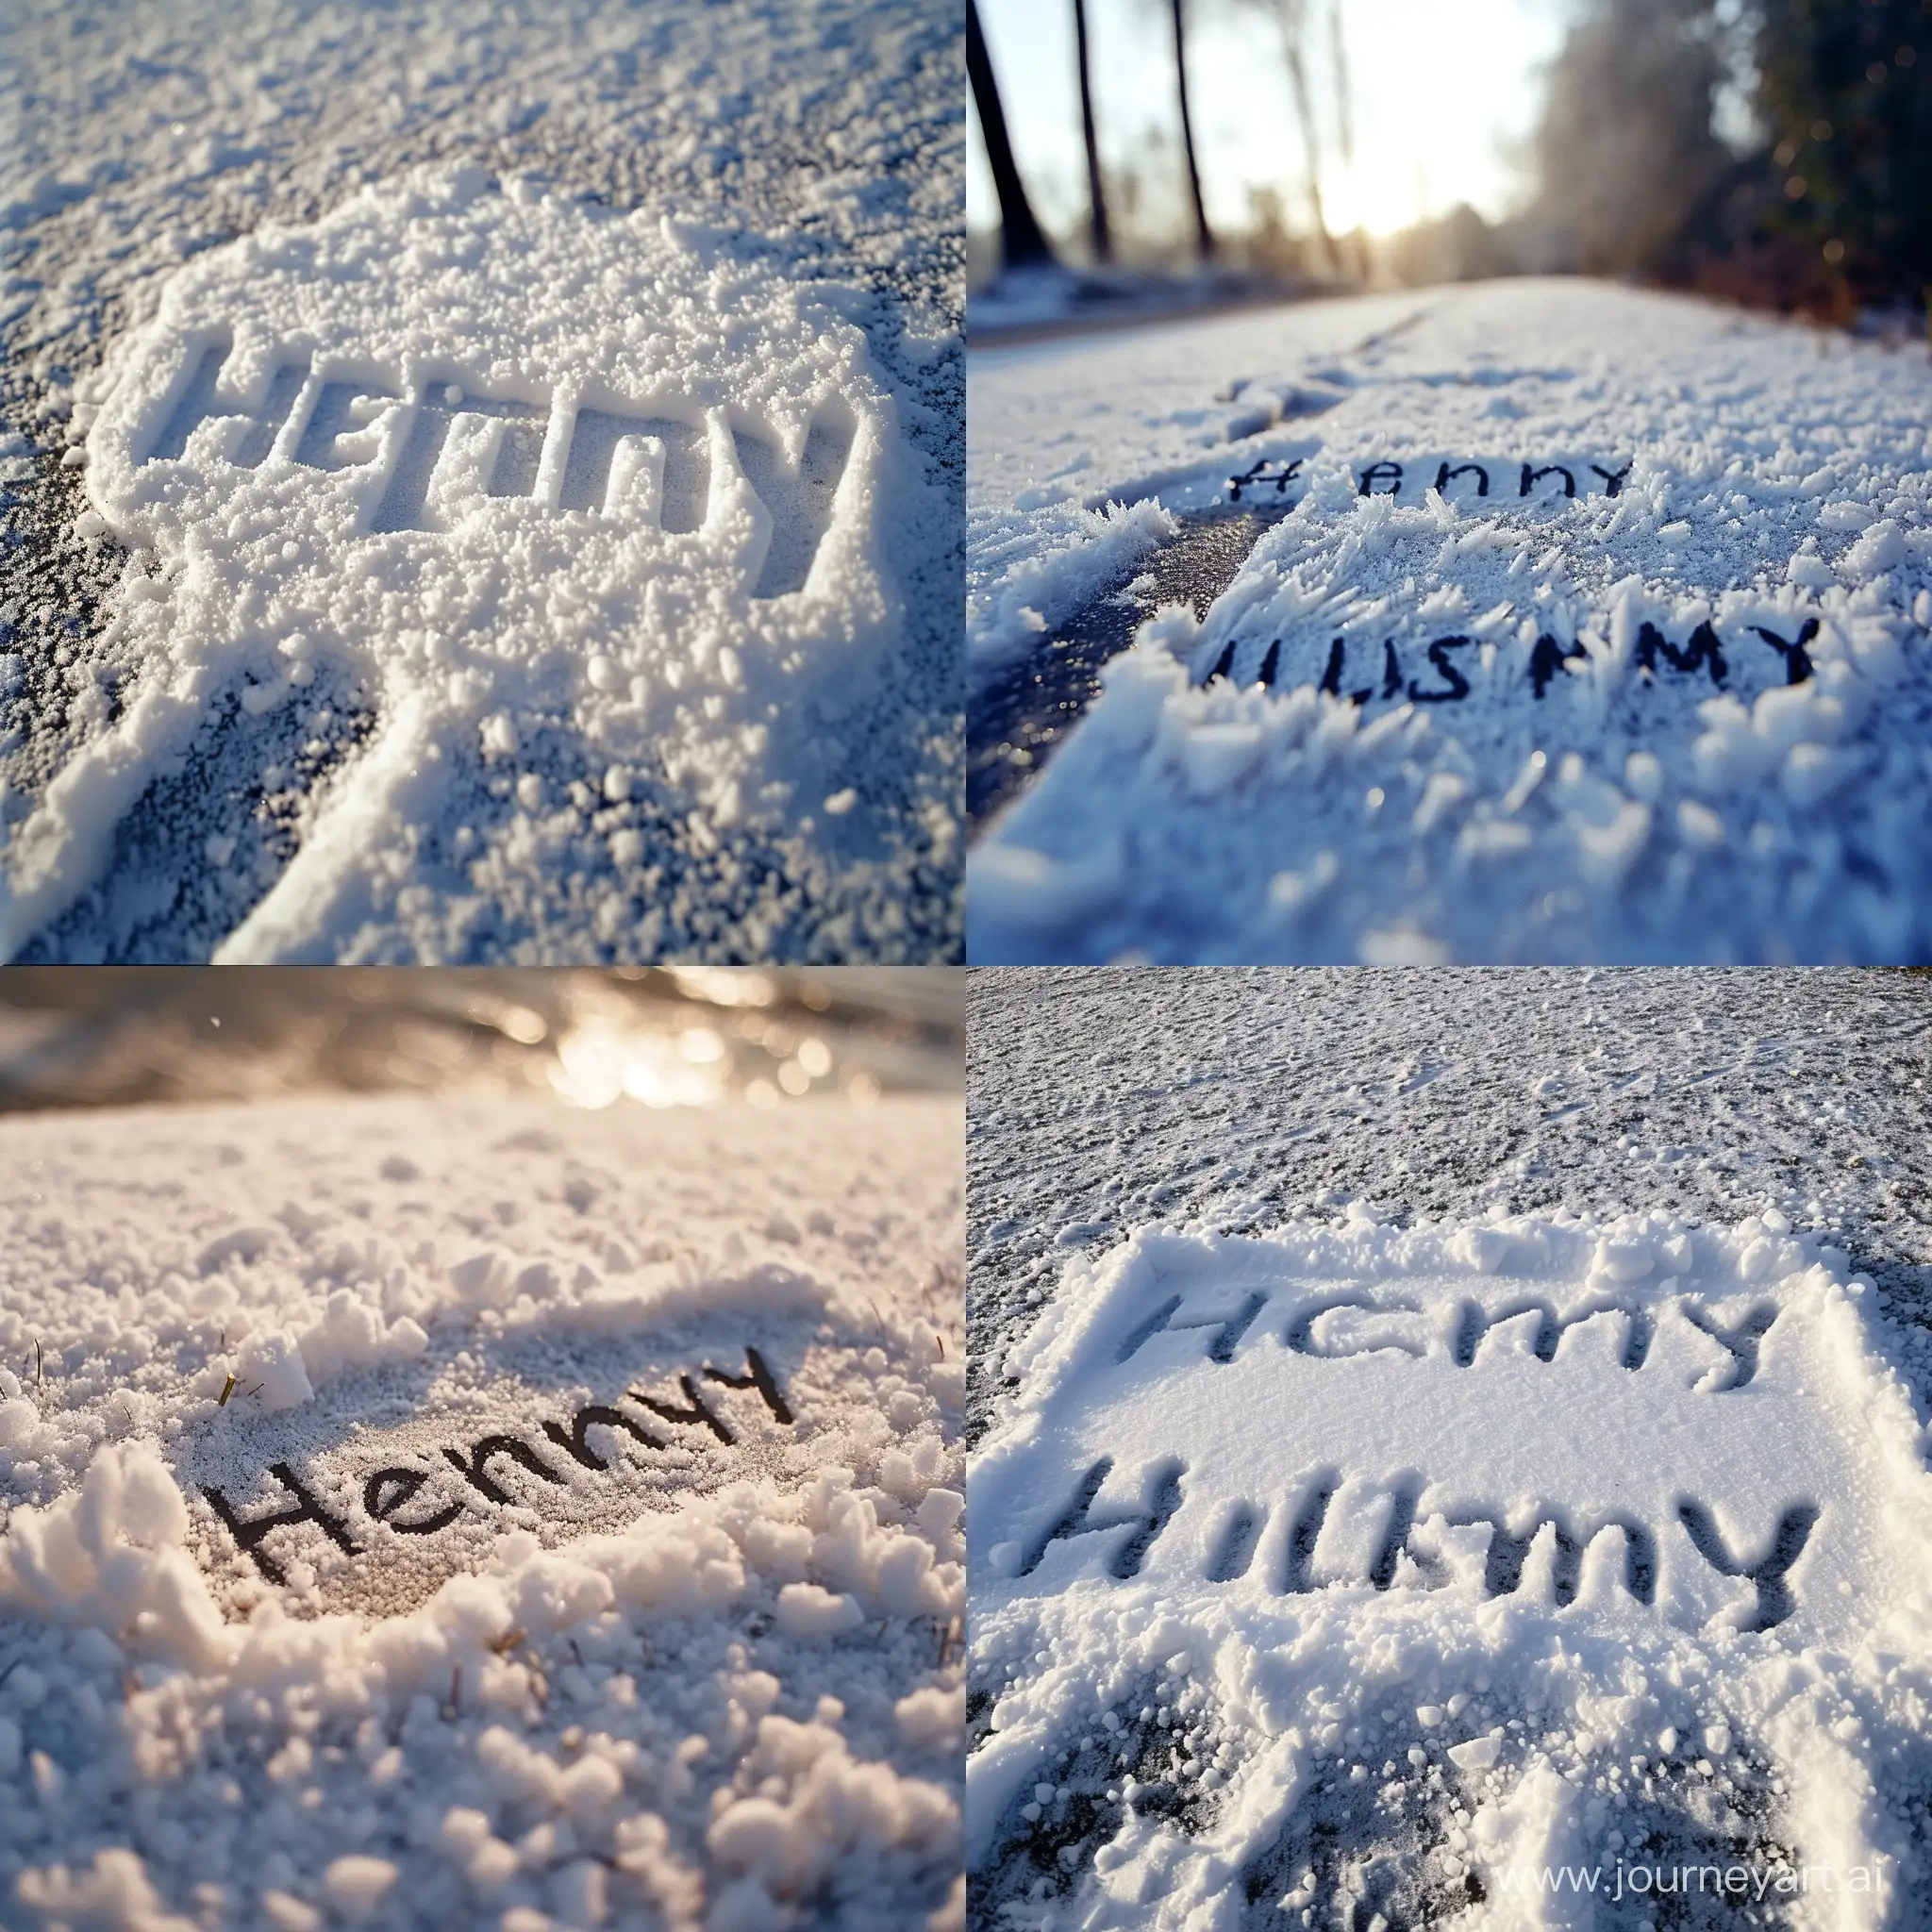 The name "Henry" and "UCLISMY" in the snow is cool